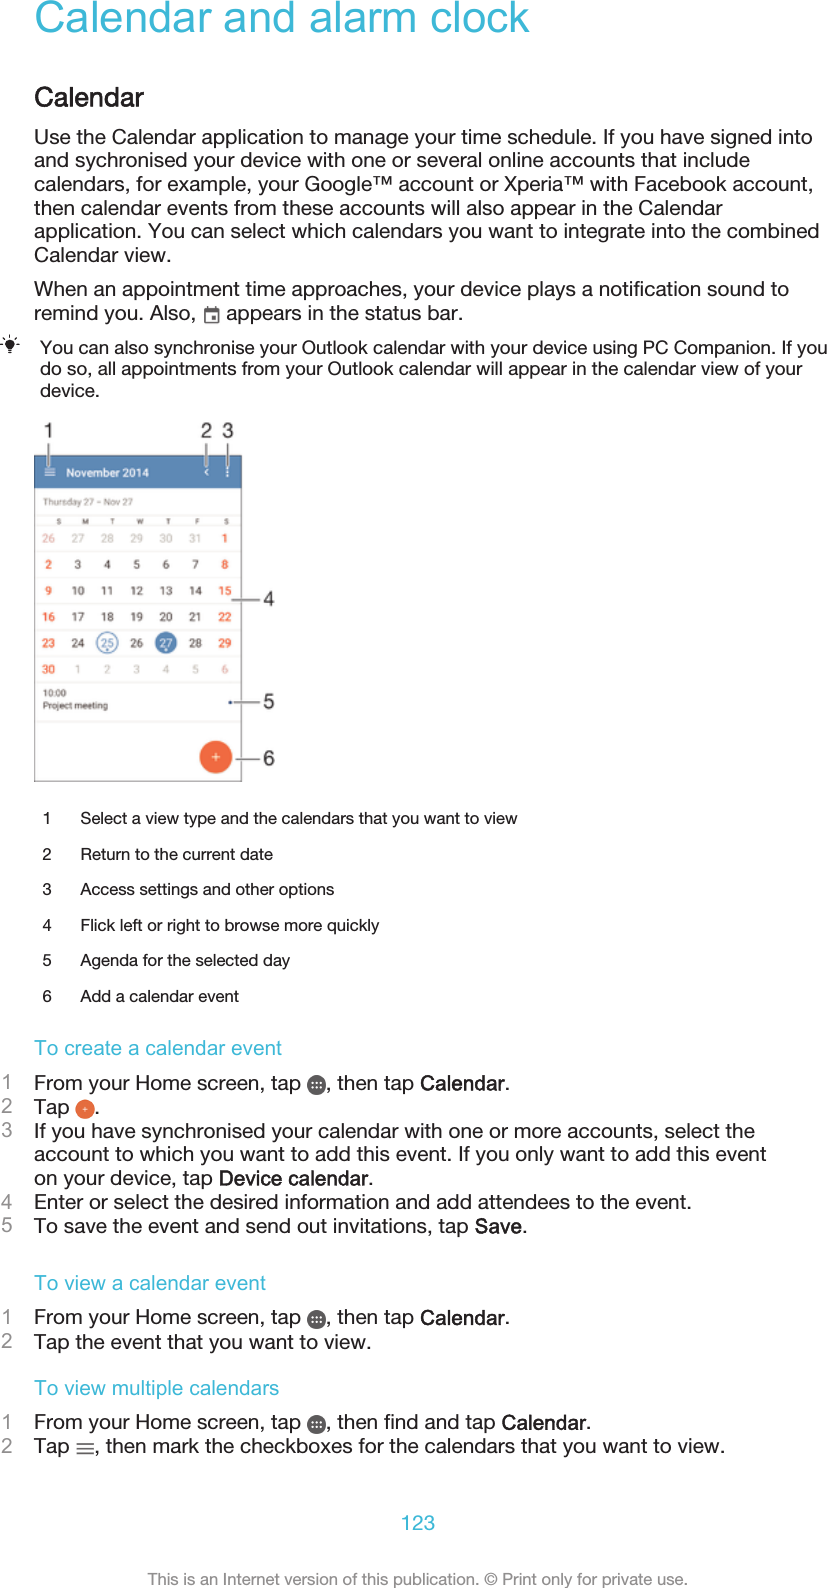 Calendar and alarm clockCalendarUse the Calendar application to manage your time schedule. If you have signed intoand sychronised your device with one or several online accounts that includecalendars, for example, your Google™ account or Xperia™ with Facebook account,then calendar events from these accounts will also appear in the Calendarapplication. You can select which calendars you want to integrate into the combinedCalendar view.When an appointment time approaches, your device plays a notification sound toremind you. Also,   appears in the status bar.You can also synchronise your Outlook calendar with your device using PC Companion. If youdo so, all appointments from your Outlook calendar will appear in the calendar view of yourdevice.1 Select a view type and the calendars that you want to view2 Return to the current date3 Access settings and other options4 Flick left or right to browse more quickly5 Agenda for the selected day6 Add a calendar eventTo create a calendar event1From your Home screen, tap  , then tap Calendar.2Tap  .3If you have synchronised your calendar with one or more accounts, select theaccount to which you want to add this event. If you only want to add this eventon your device, tap Device calendar.4Enter or select the desired information and add attendees to the event.5To save the event and send out invitations, tap Save.To view a calendar event1From your Home screen, tap  , then tap Calendar.2Tap the event that you want to view.To view multiple calendars1From your Home screen, tap  , then find and tap Calendar.2Tap  , then mark the checkboxes for the calendars that you want to view.123This is an Internet version of this publication. © Print only for private use.